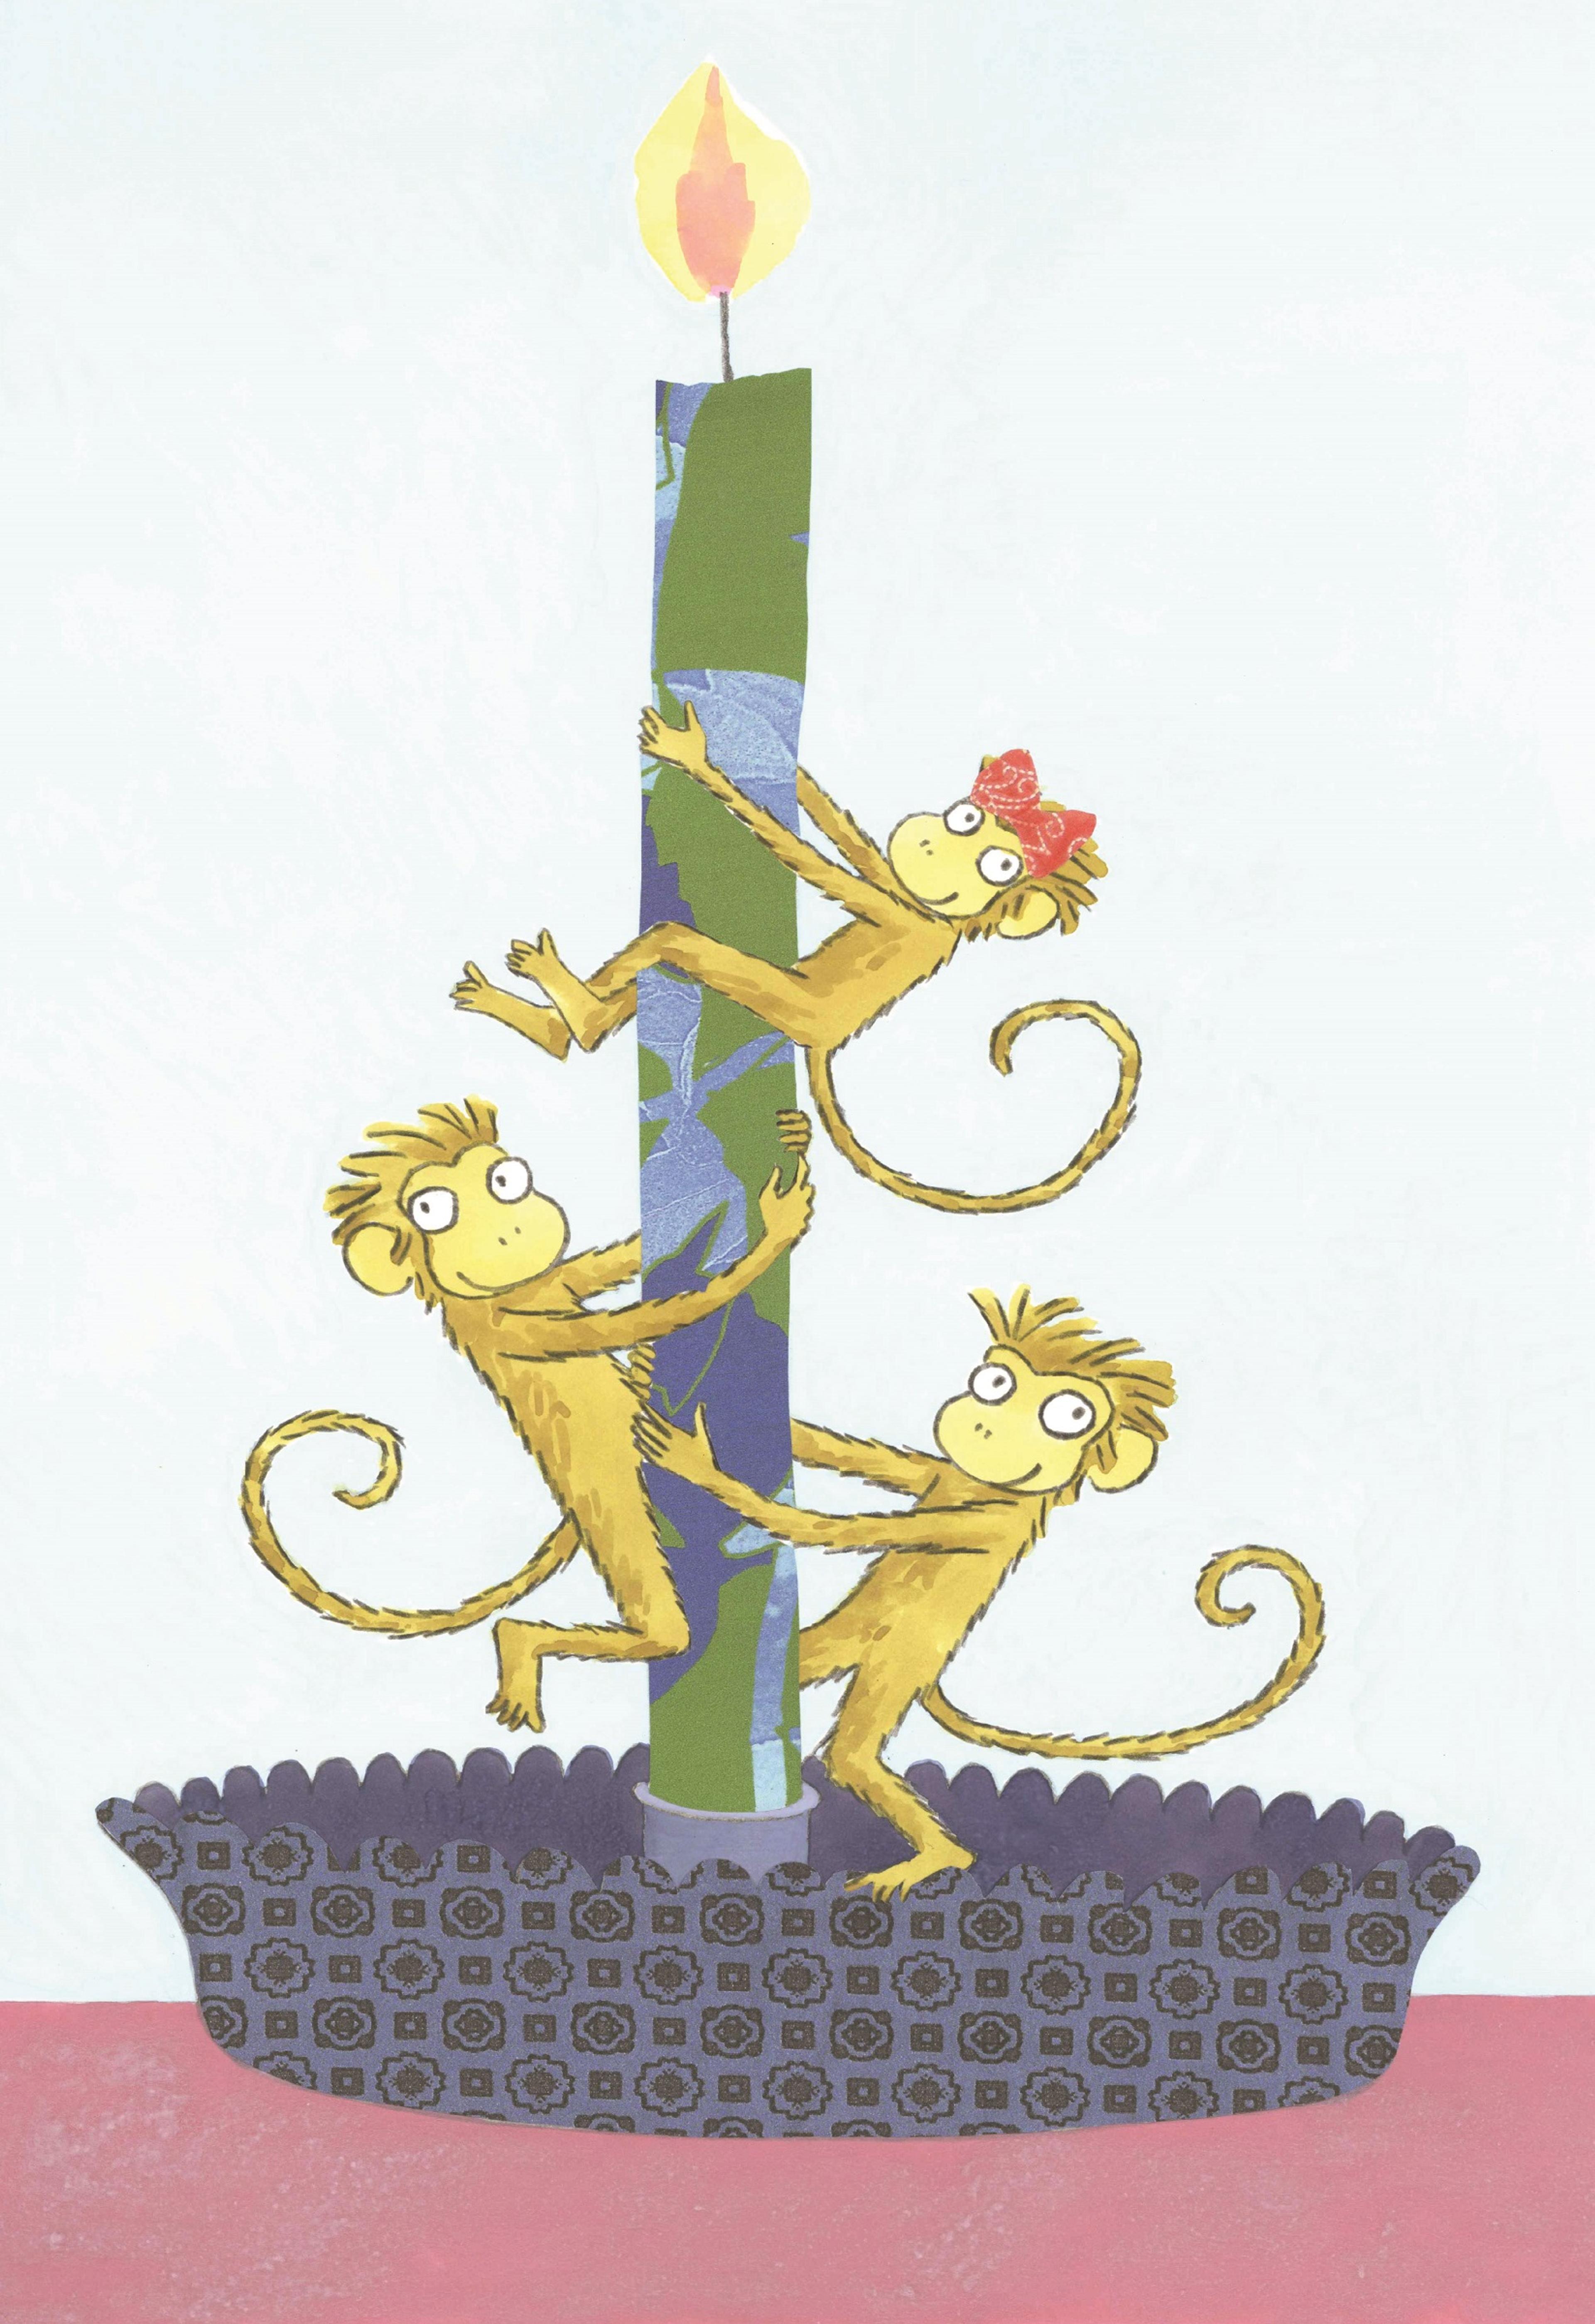 Illustration of three monkeys climbing up a candle